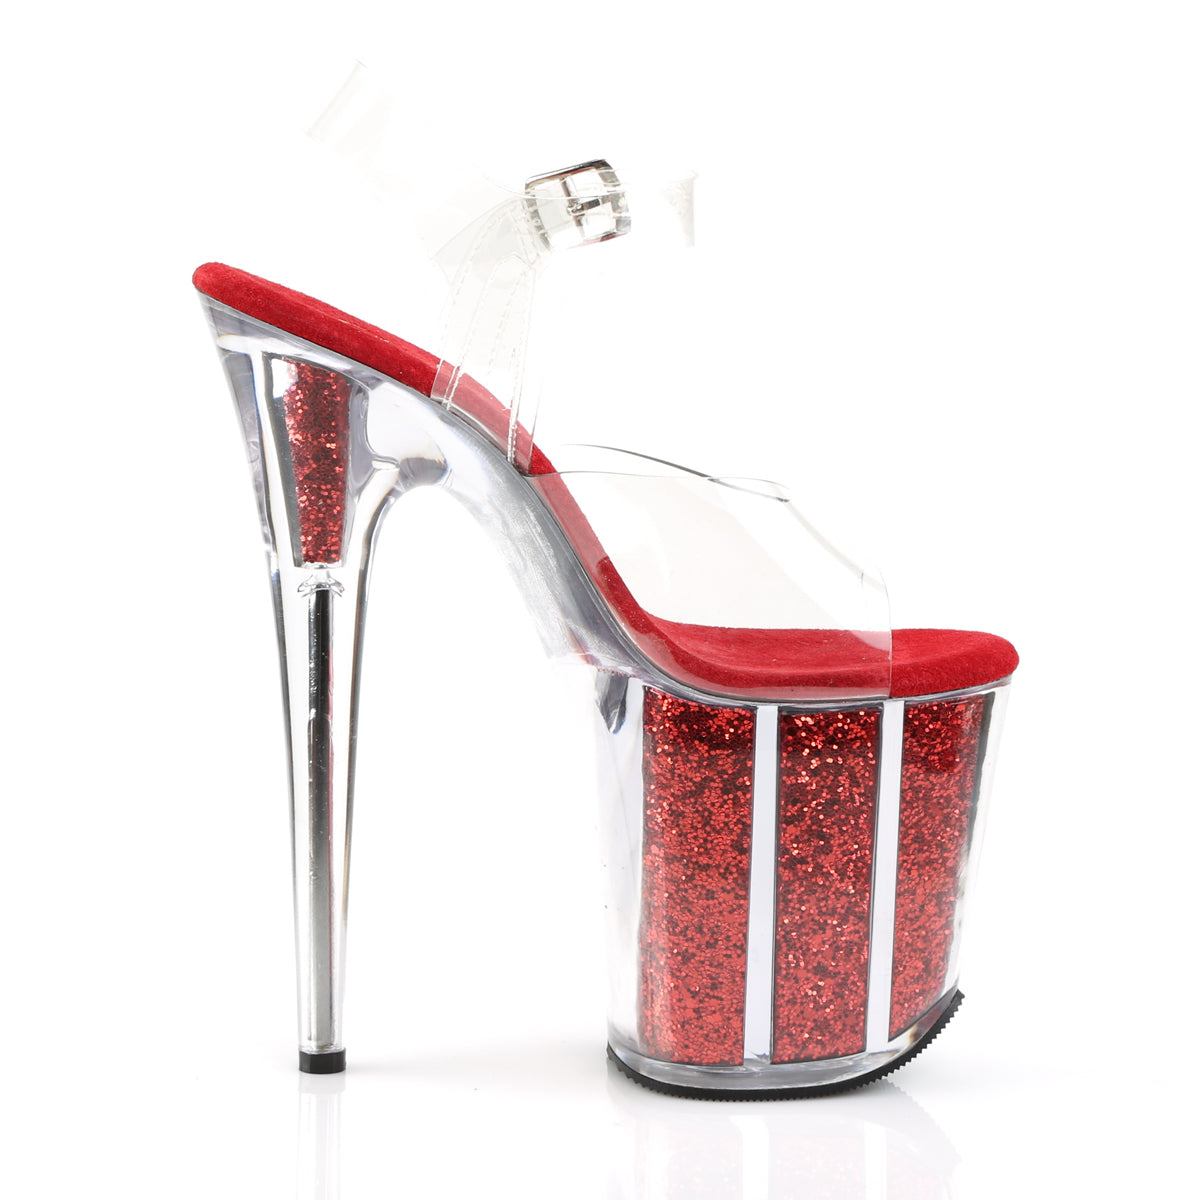 FLAMINGO-808G 8" Heel Clear Red Glitter Pole Dance Platforms-Pleaser- Sexy Shoes Fetish Heels